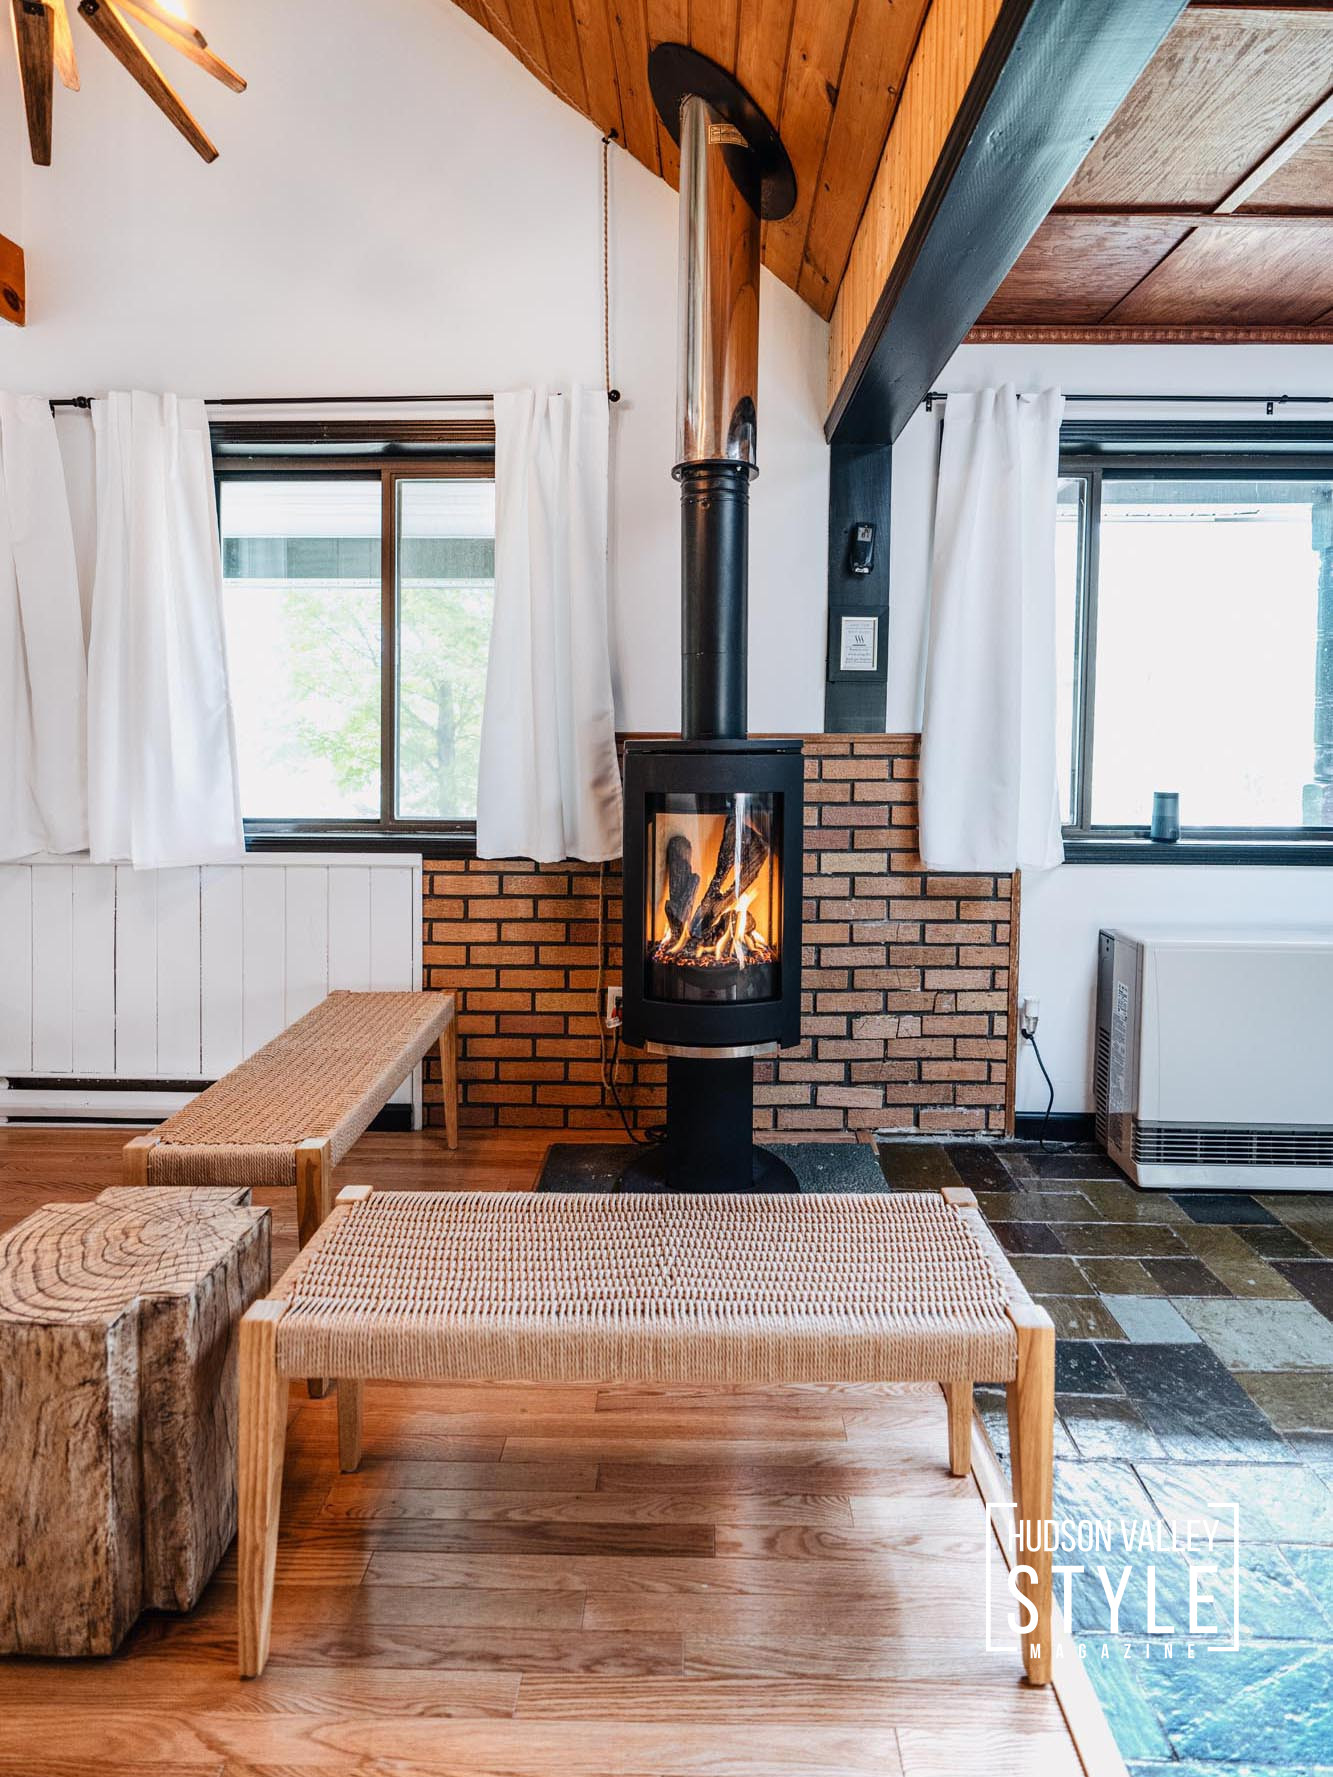 Tips for Finding the Best Airbnb in the Hudson Valley